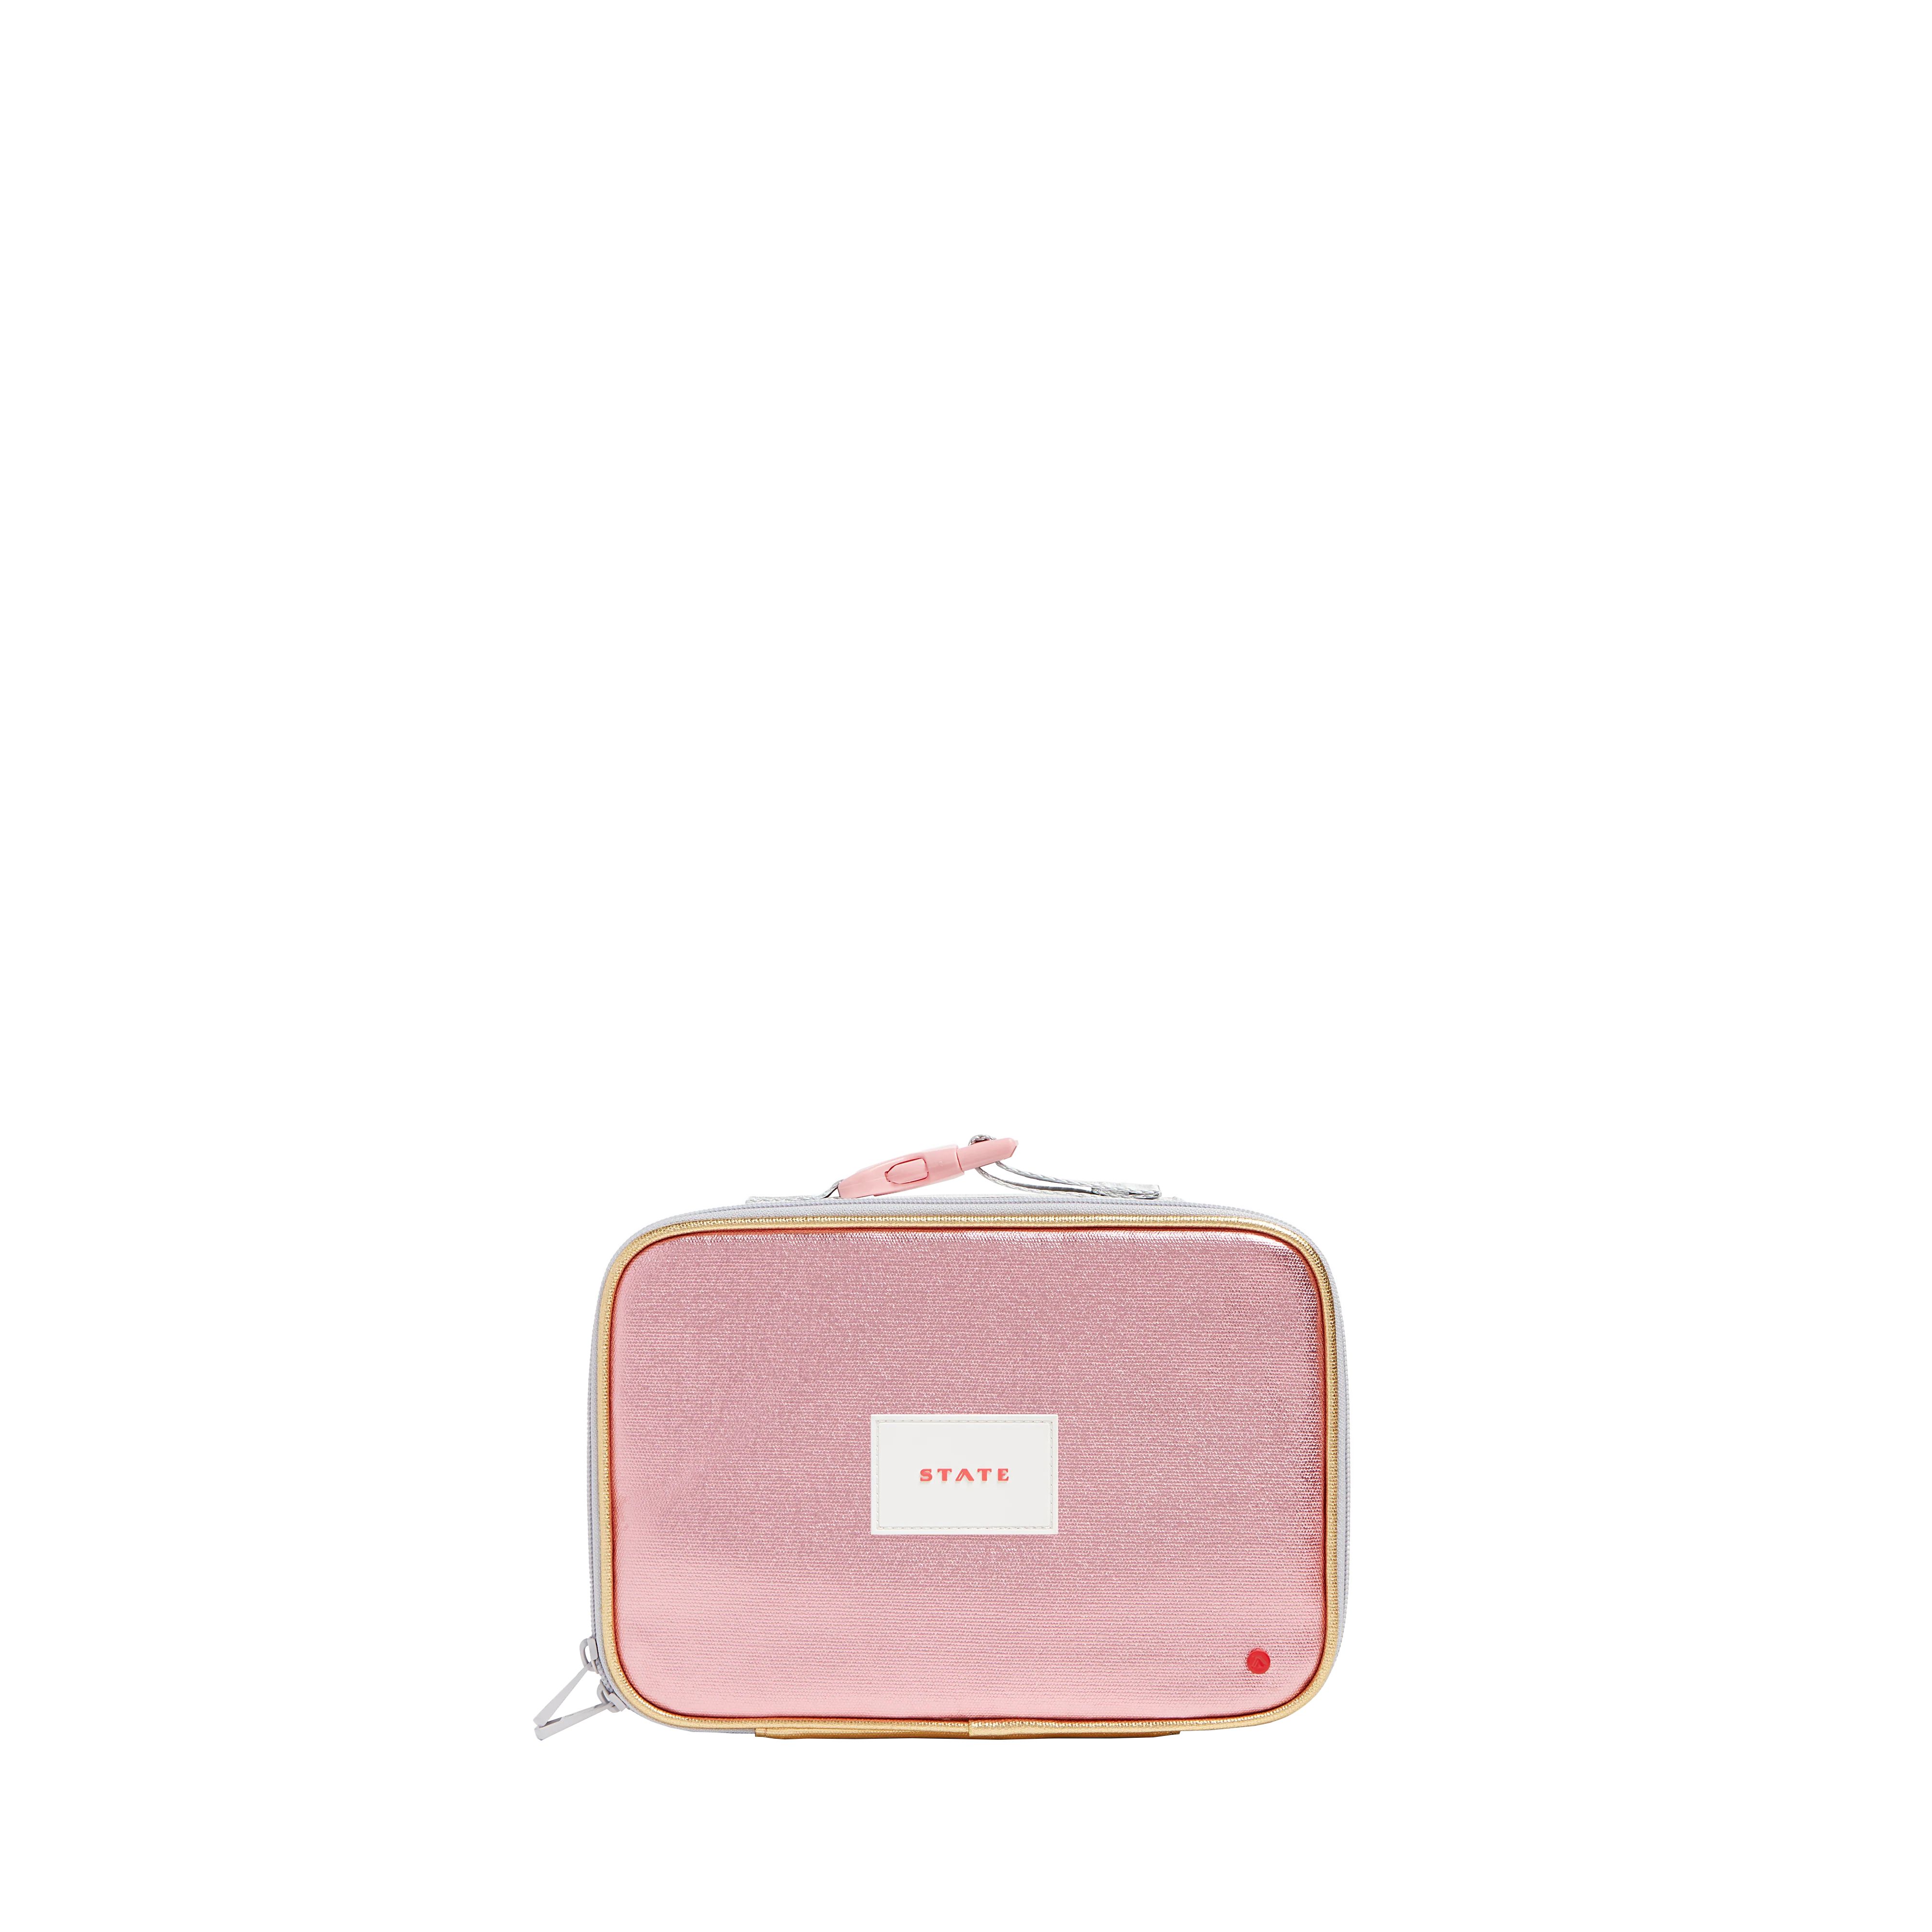 STATE Bags | Rodgers Lunch Box Metallic Pink/Silver | STATE Bags